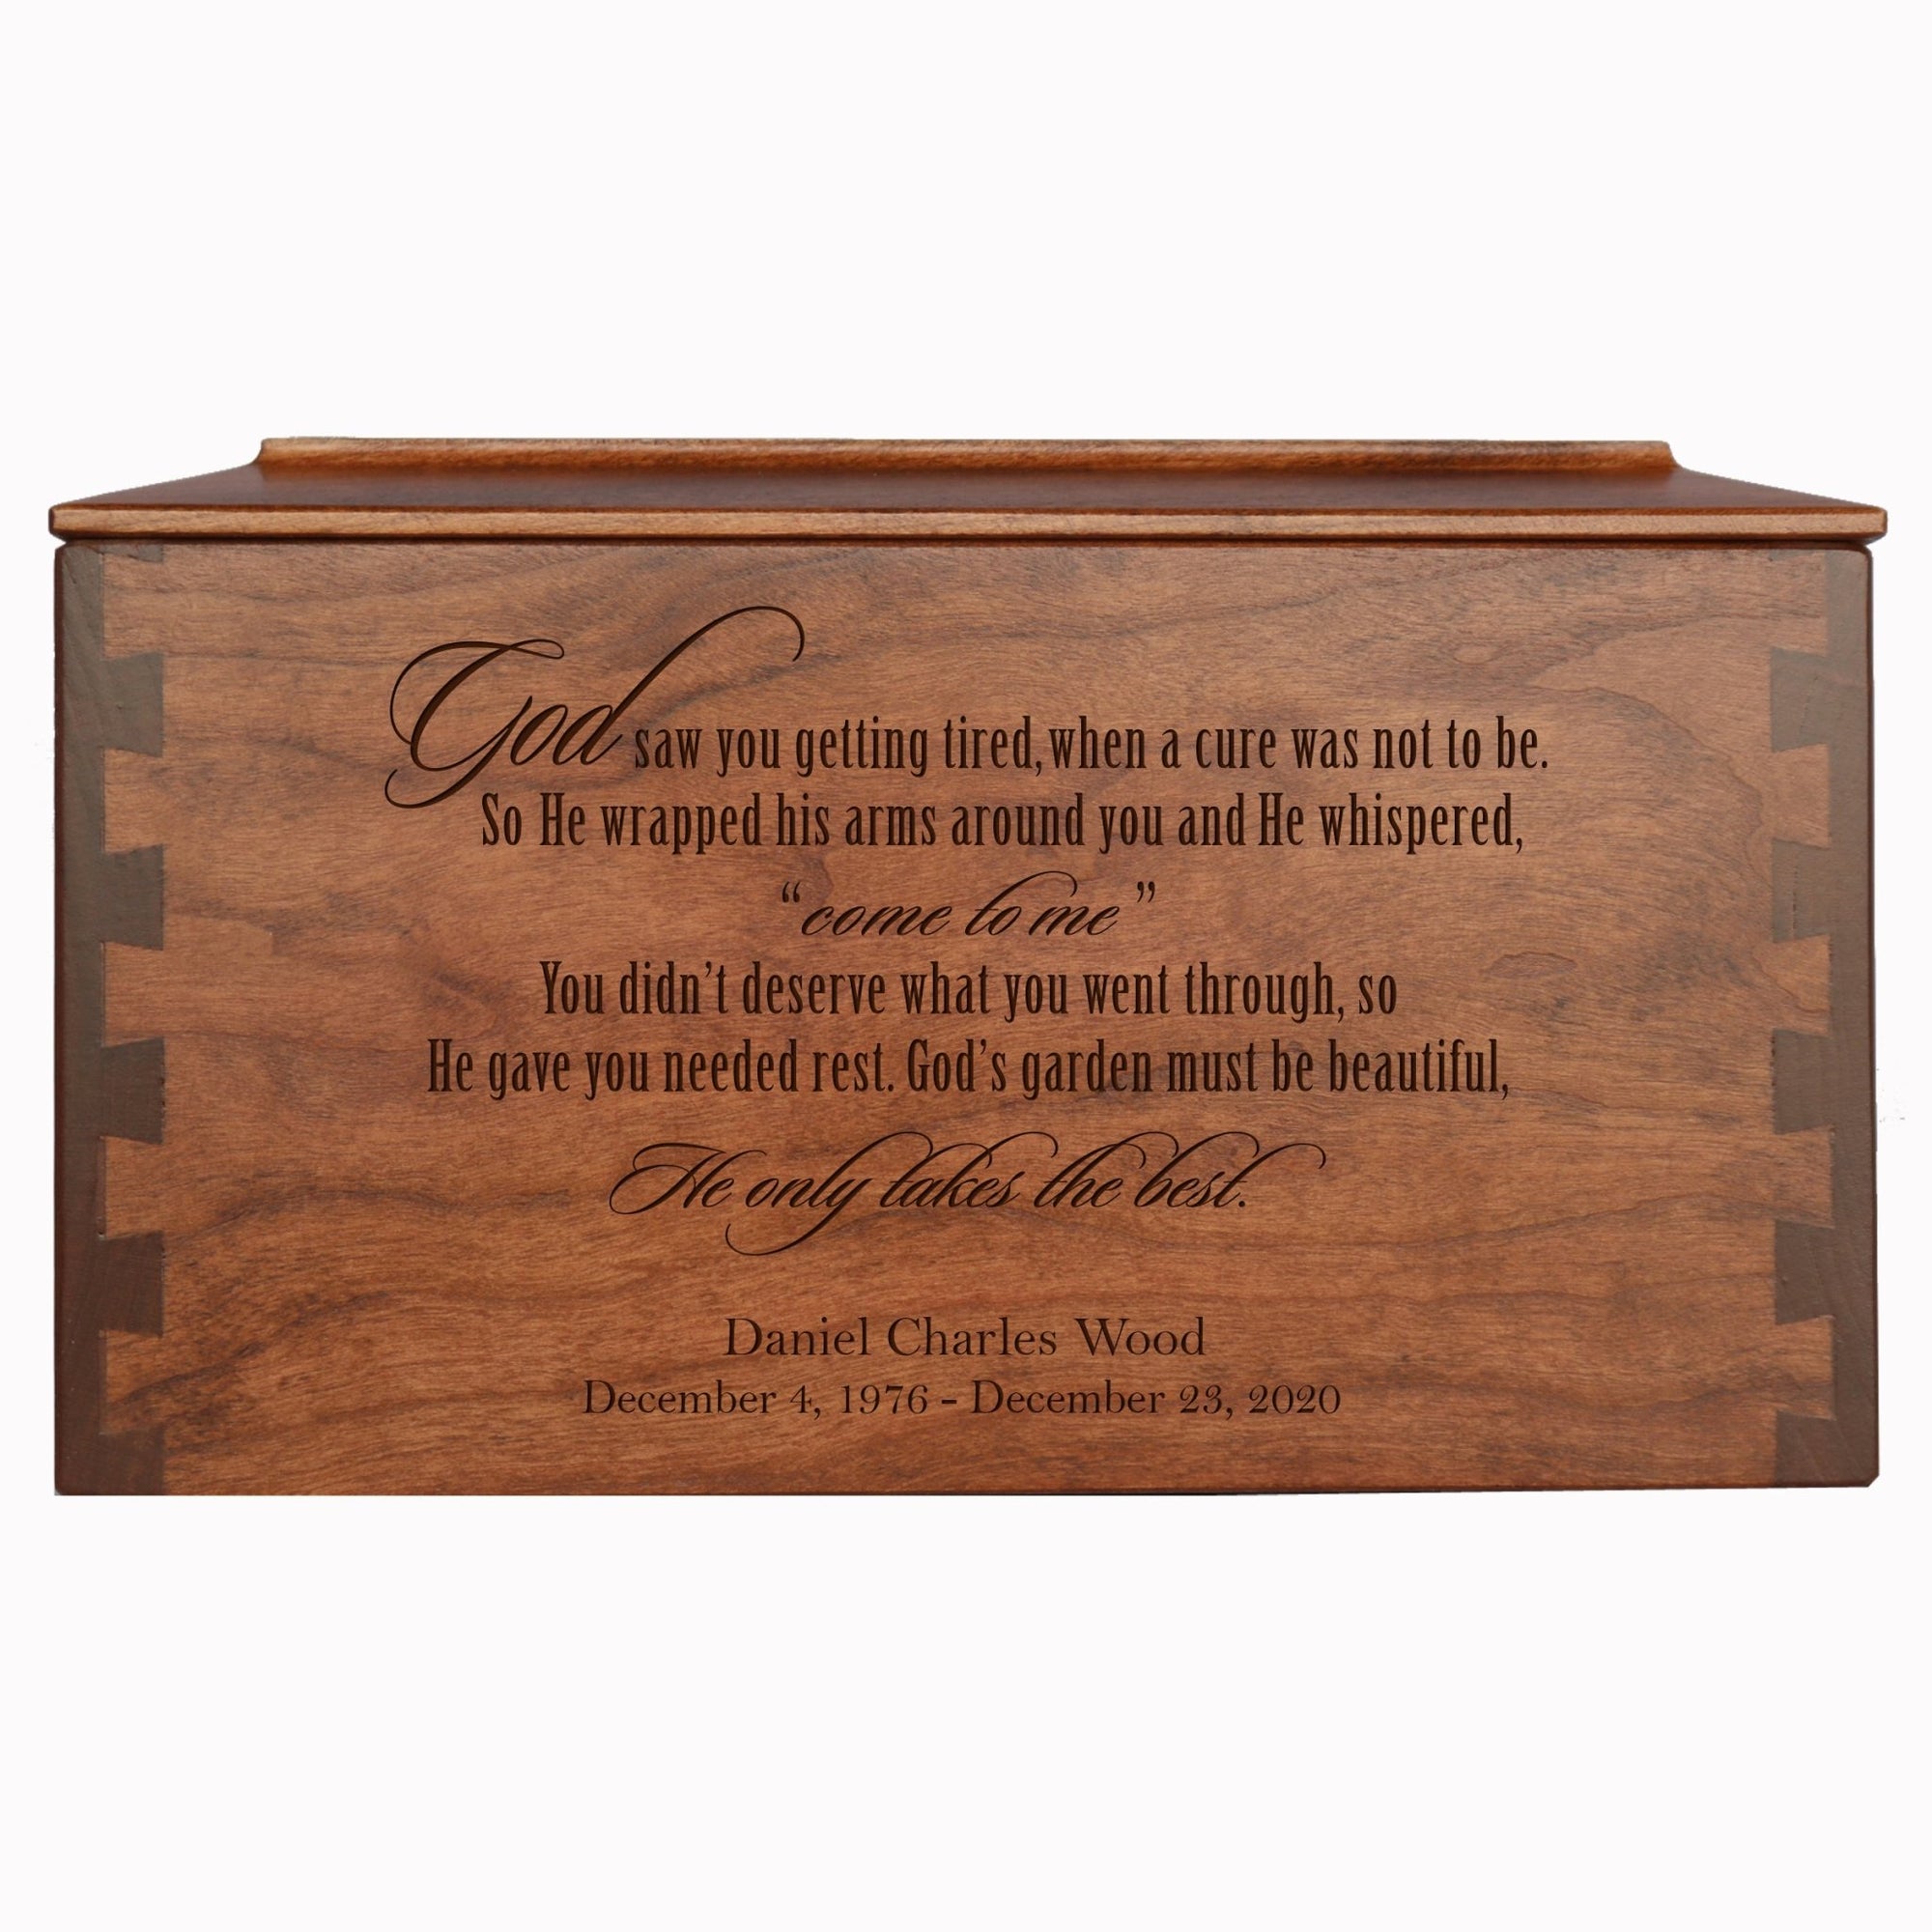 Custom Wooden Cremation Urn Box Large for Human Ashes holds 146 cu in - God Saw You Getting Tired - LifeSong Milestones